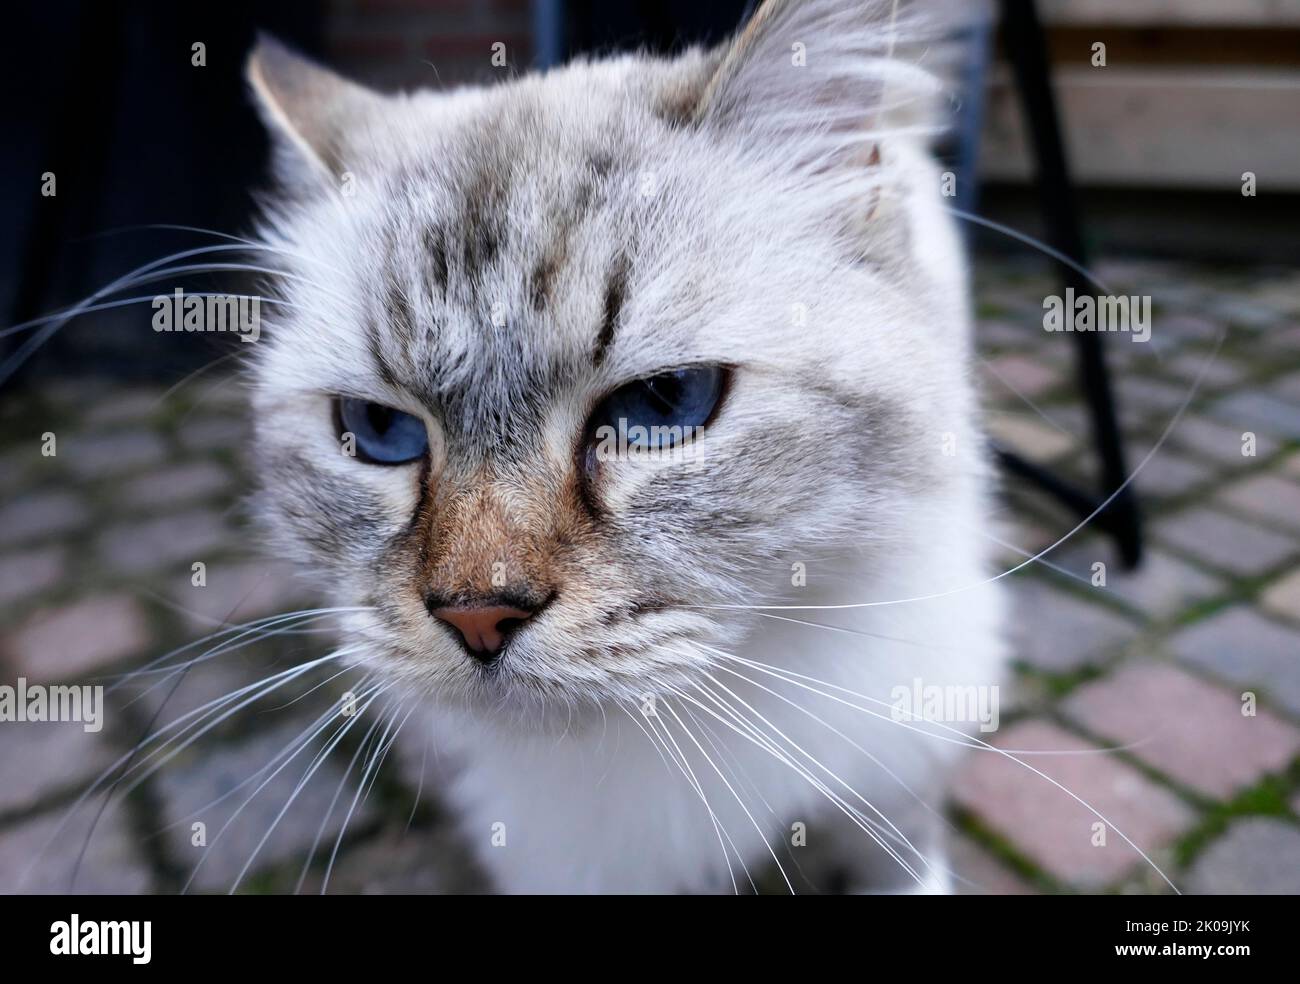 The eyes of a bored ragdoll cat. This is a breed with a distinct color-point coat and blue eyes. Stock Photo